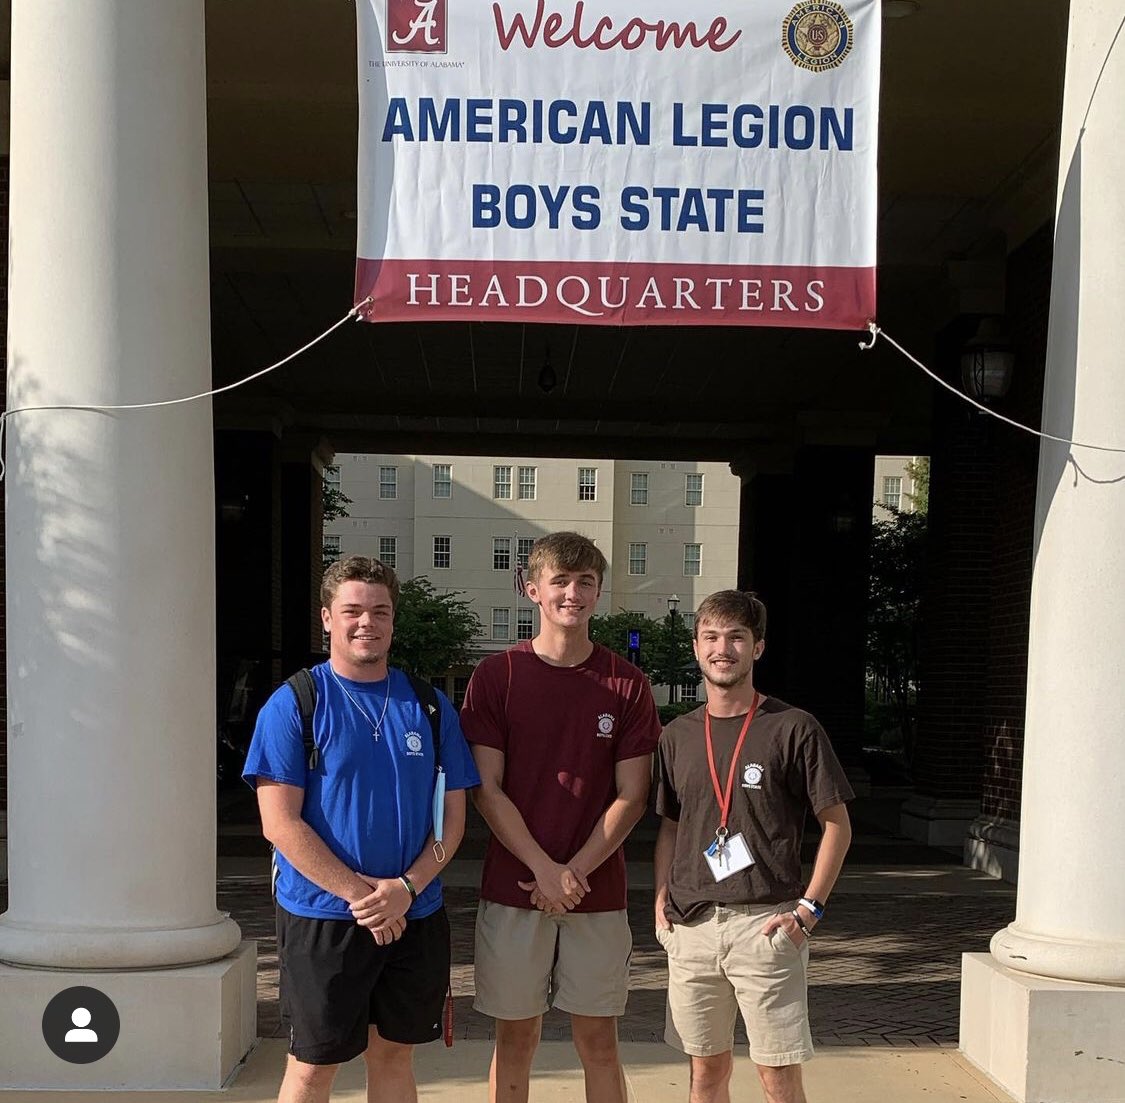 Stetson had the opportunity to represent Coffee County Schools at @alboysstate at The University if Alabama this week. He had a great week and learned a lot!